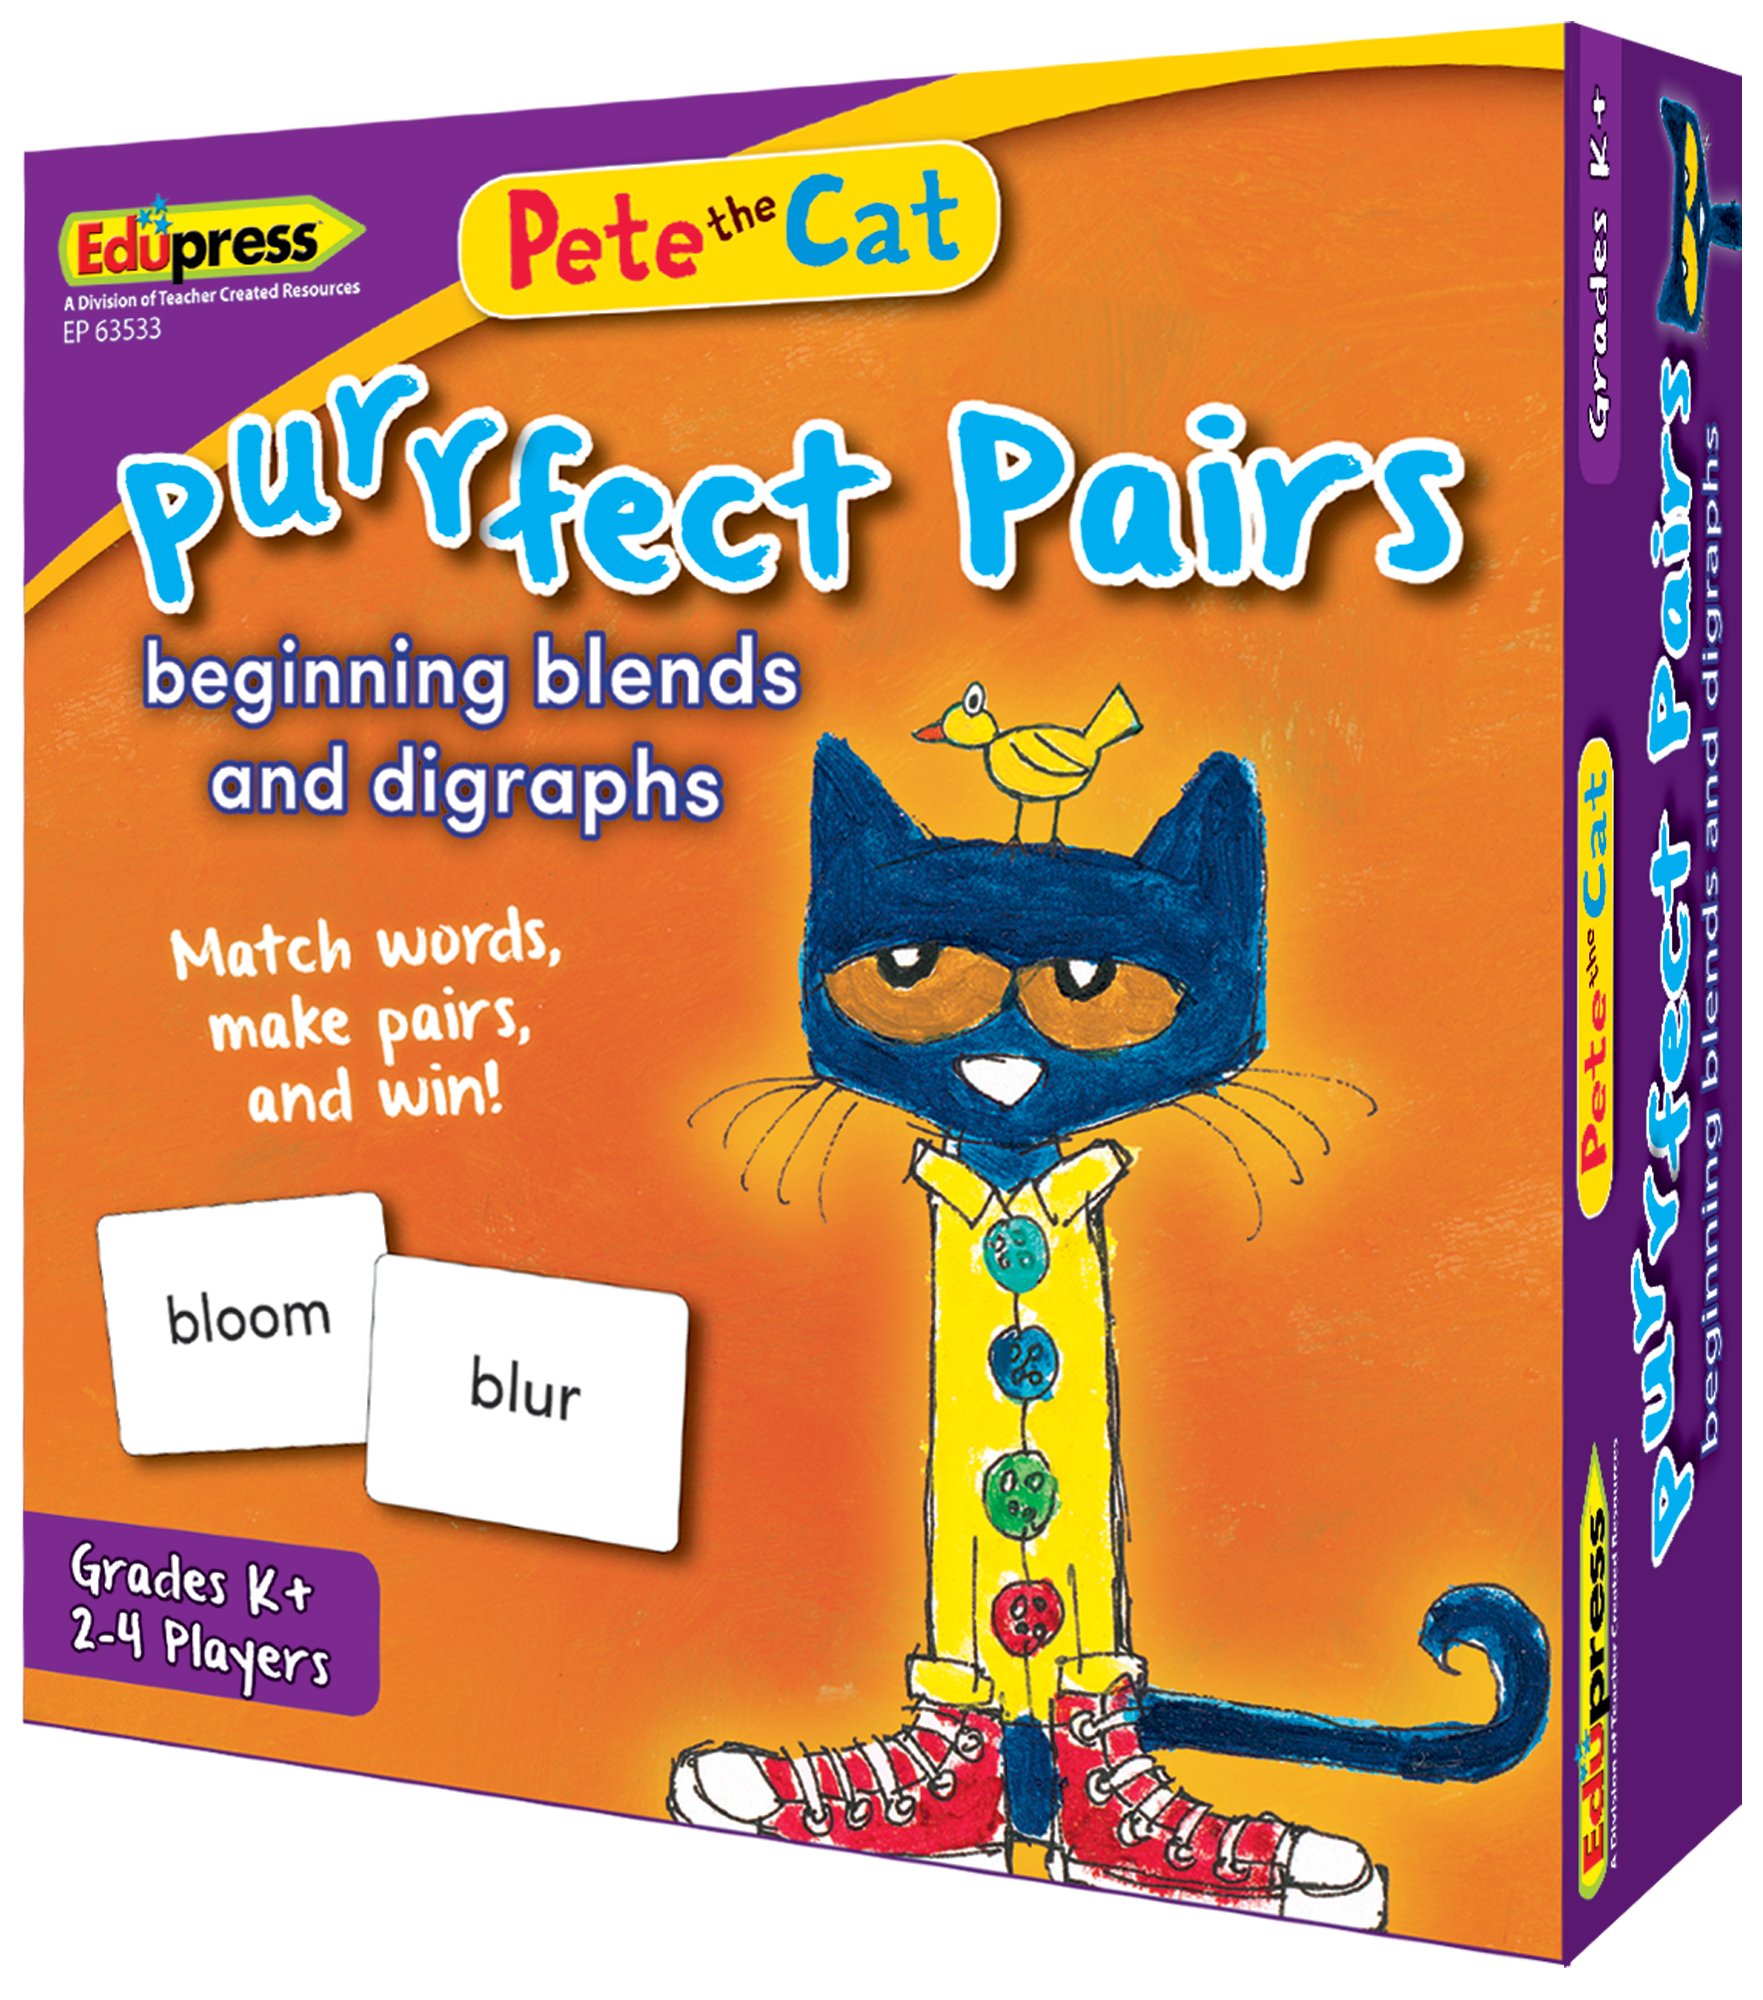 Pete the CatÂ® Purrfect Pairs Game: Beginning Blends and Digraghs